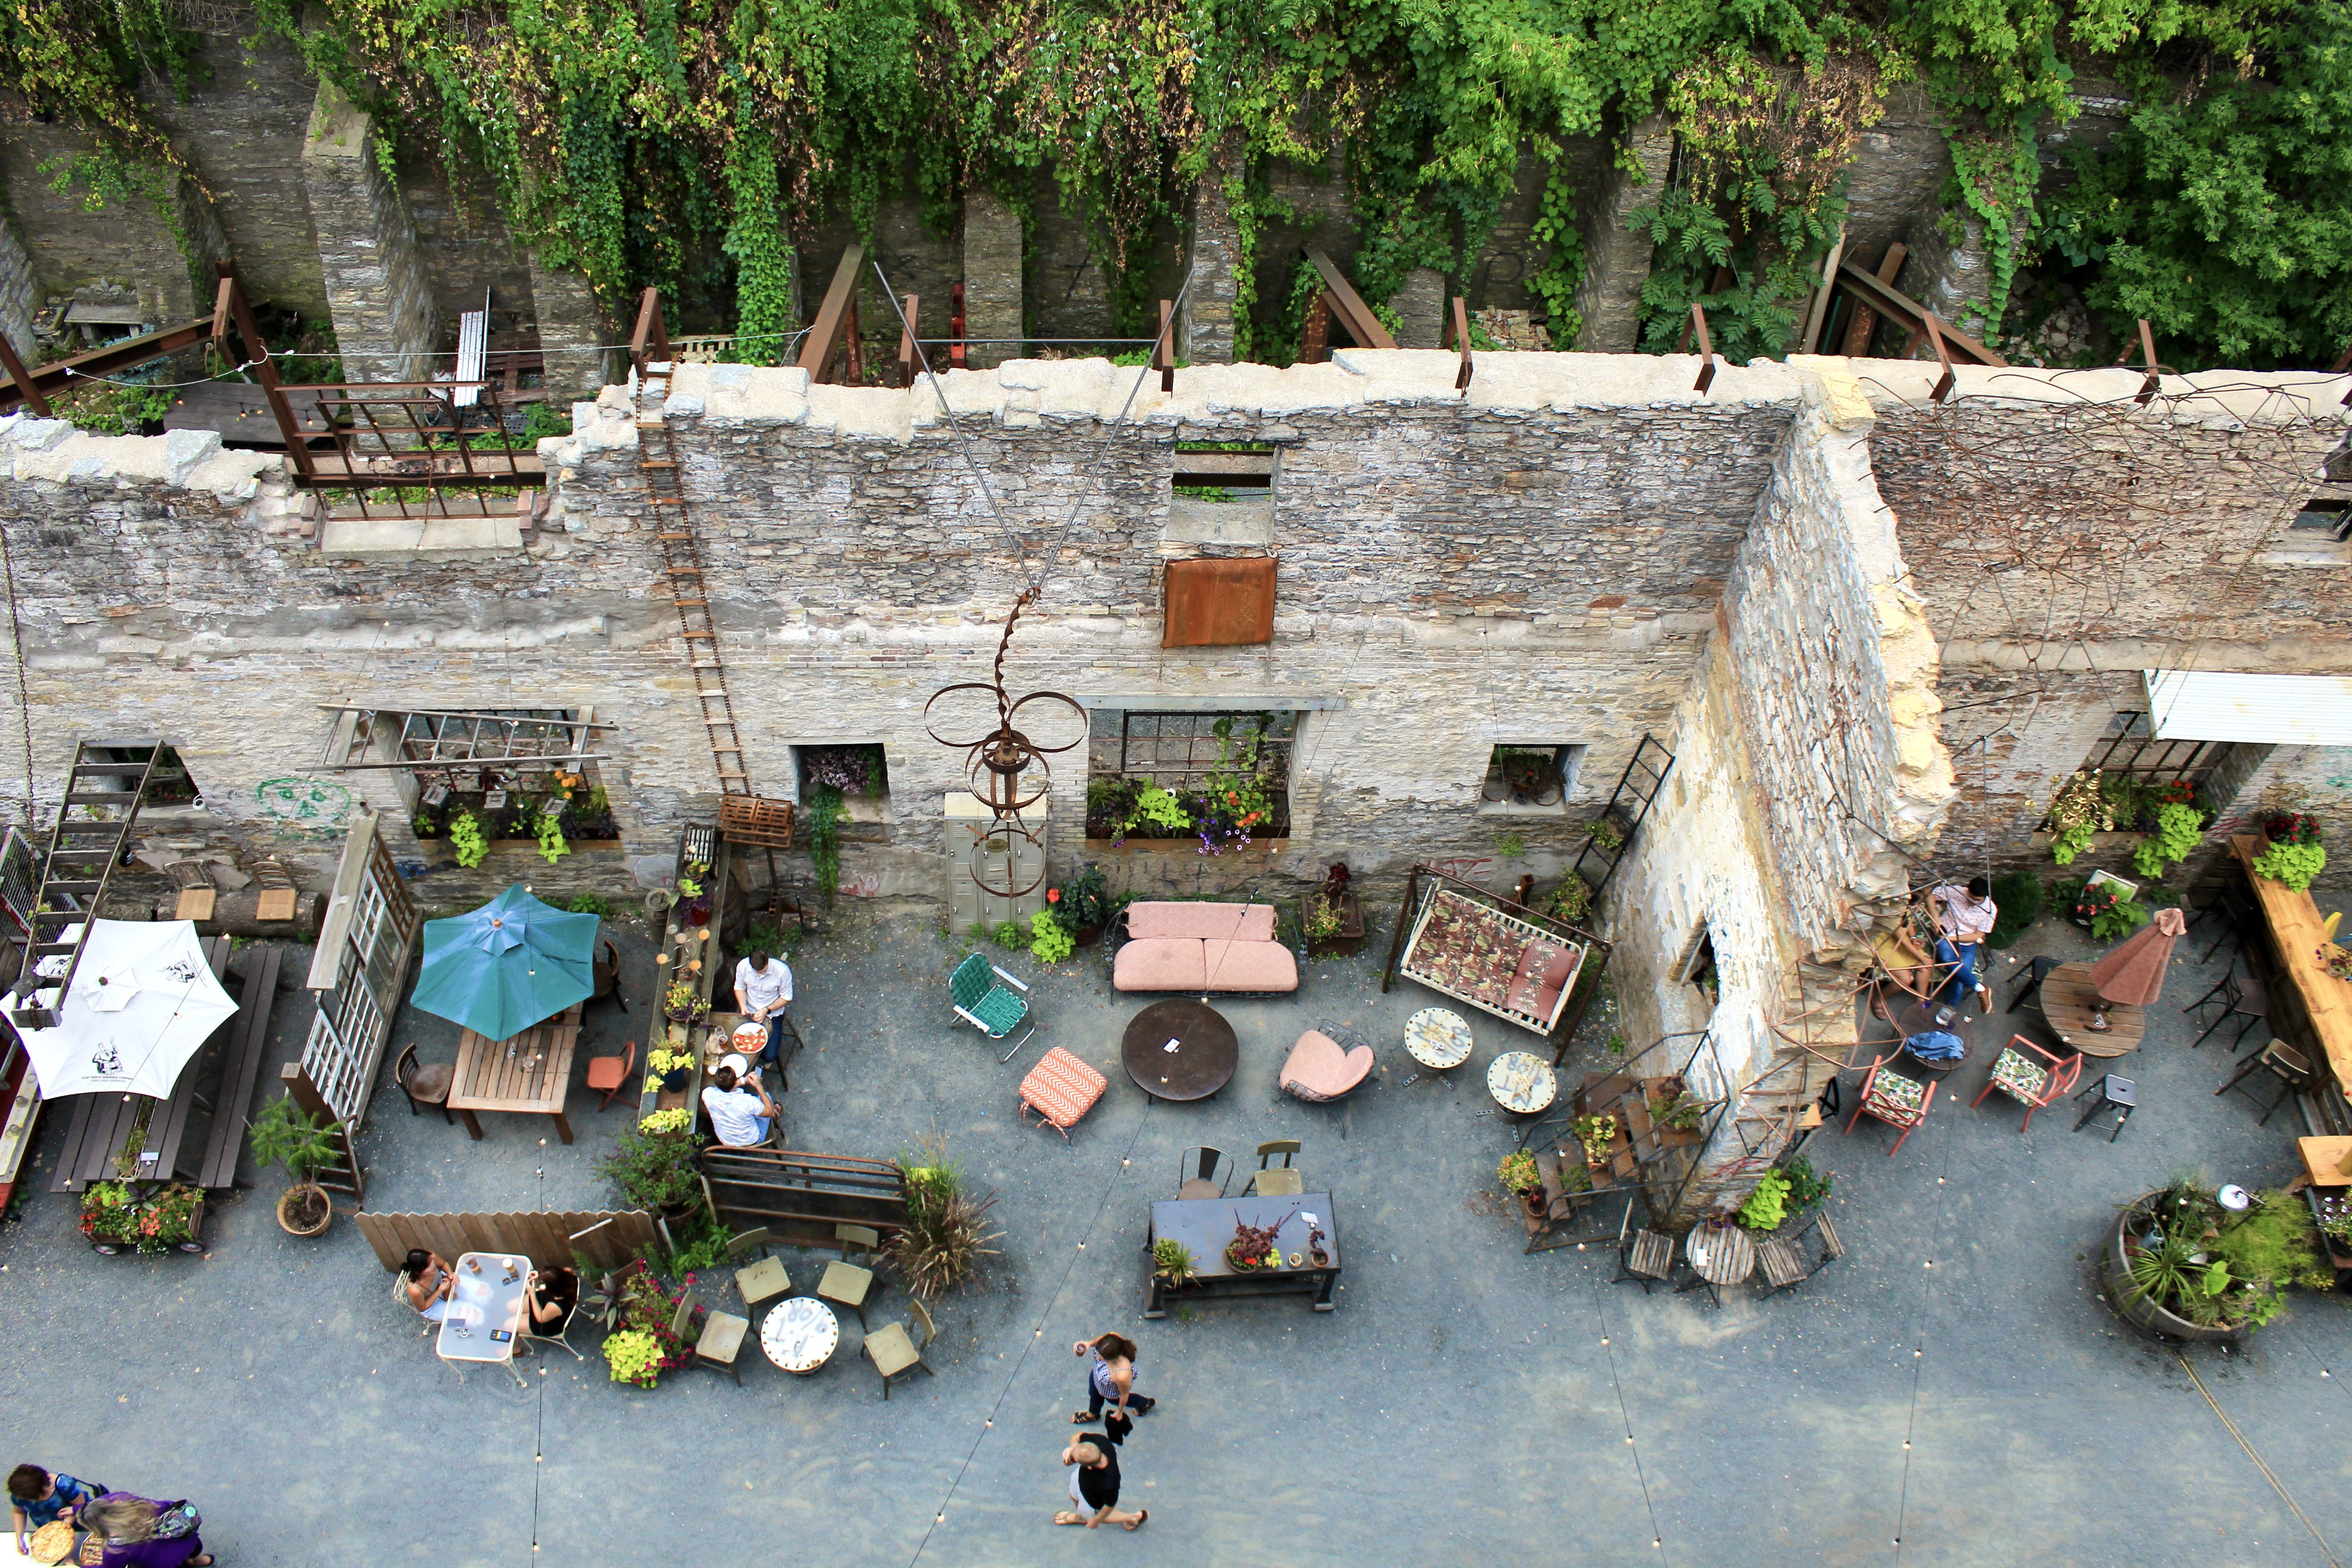 A large outdoor patio seen from above